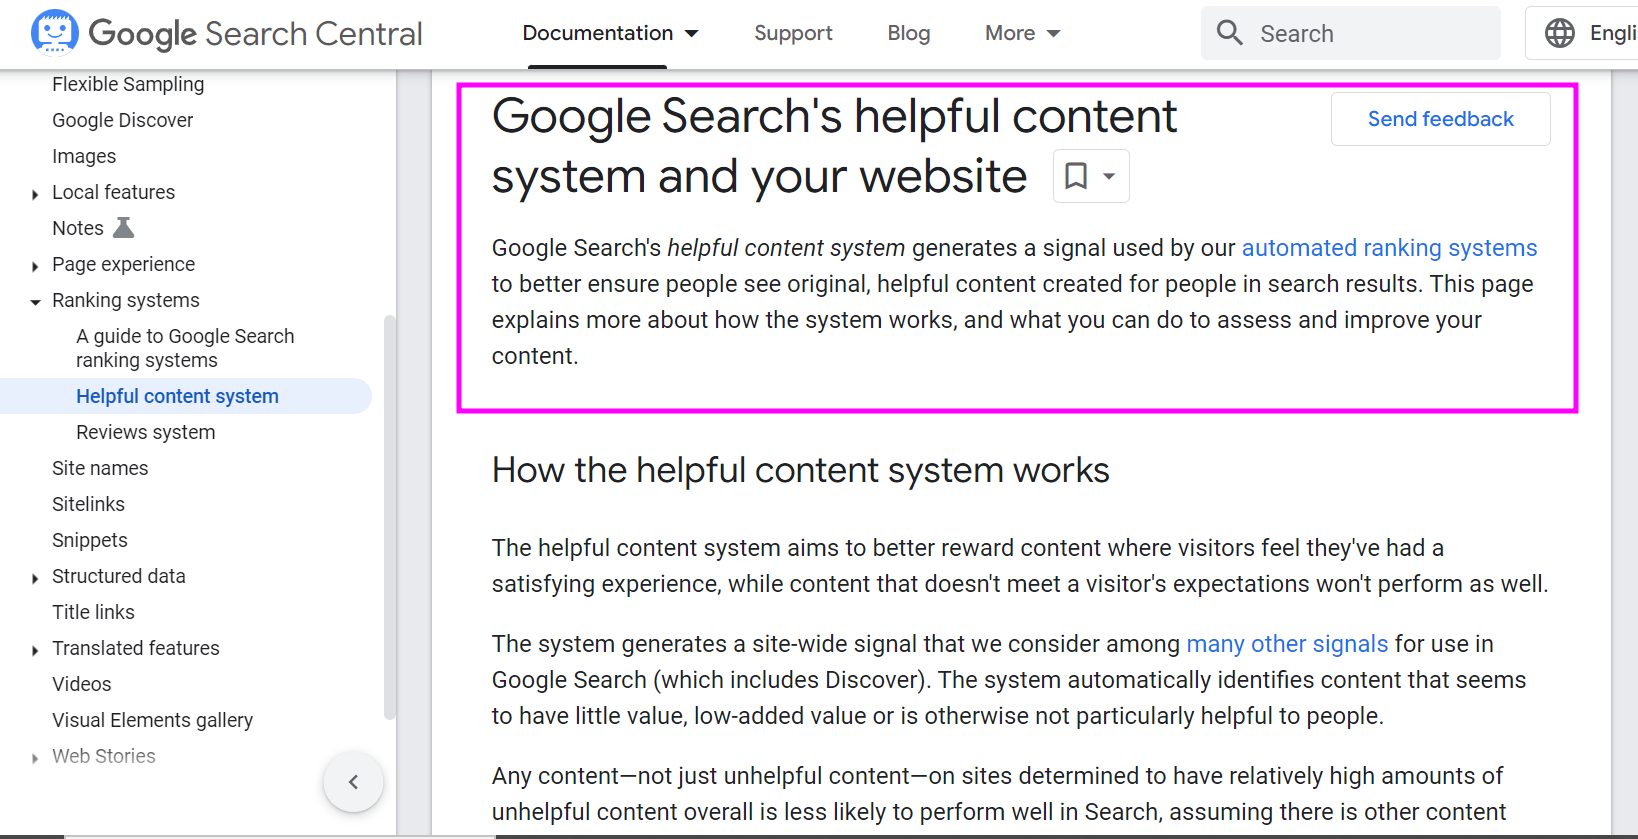 Google's helpful content guidelines